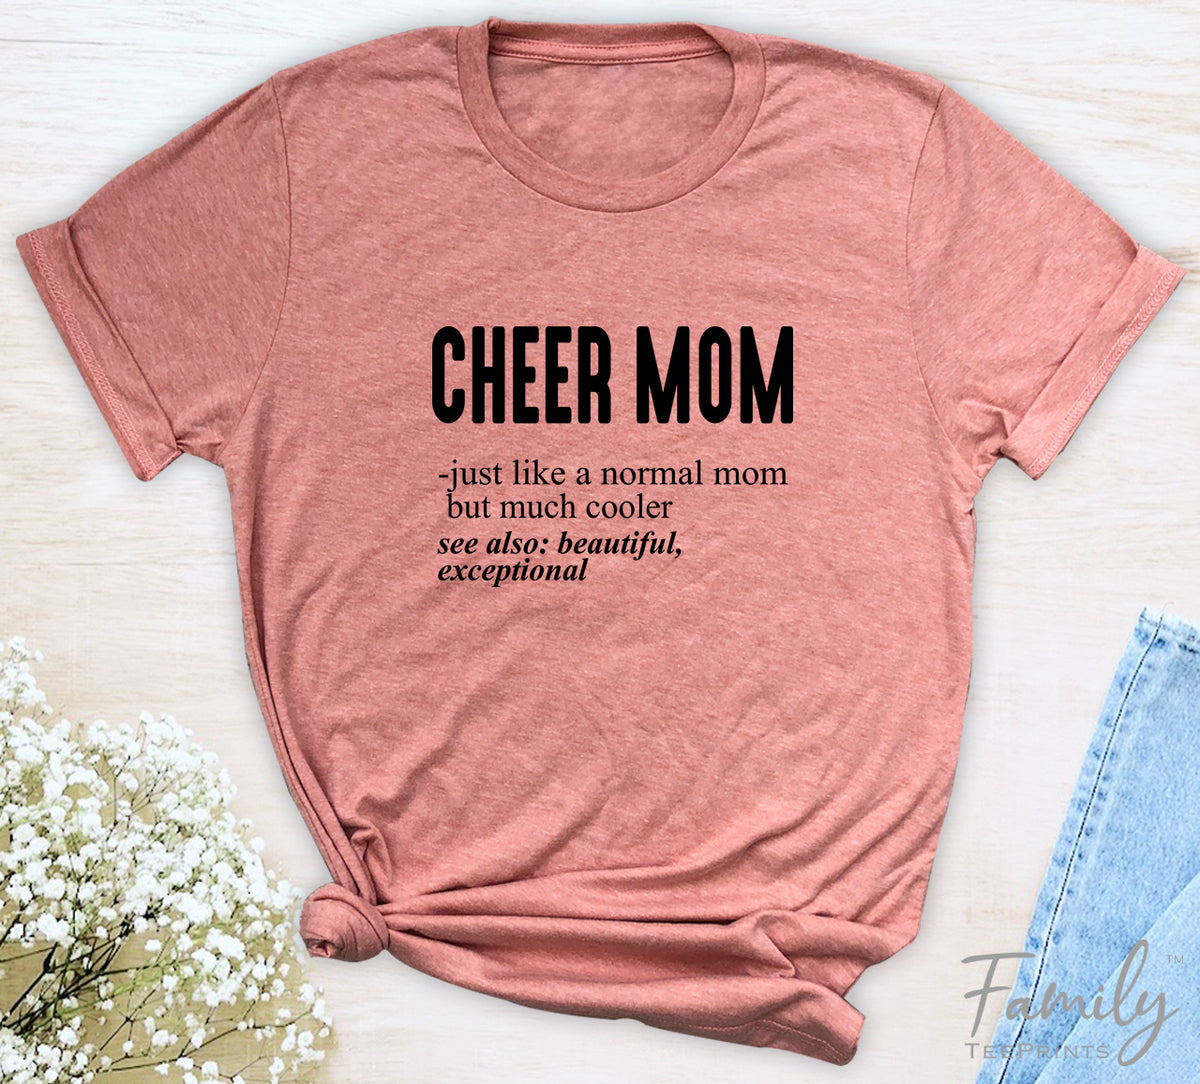 Cheer Mom Just Like A Normal Mom - Unisex T-shirt - Cheer Mom Shirt - Gift For Cheer Mom - familyteeprints